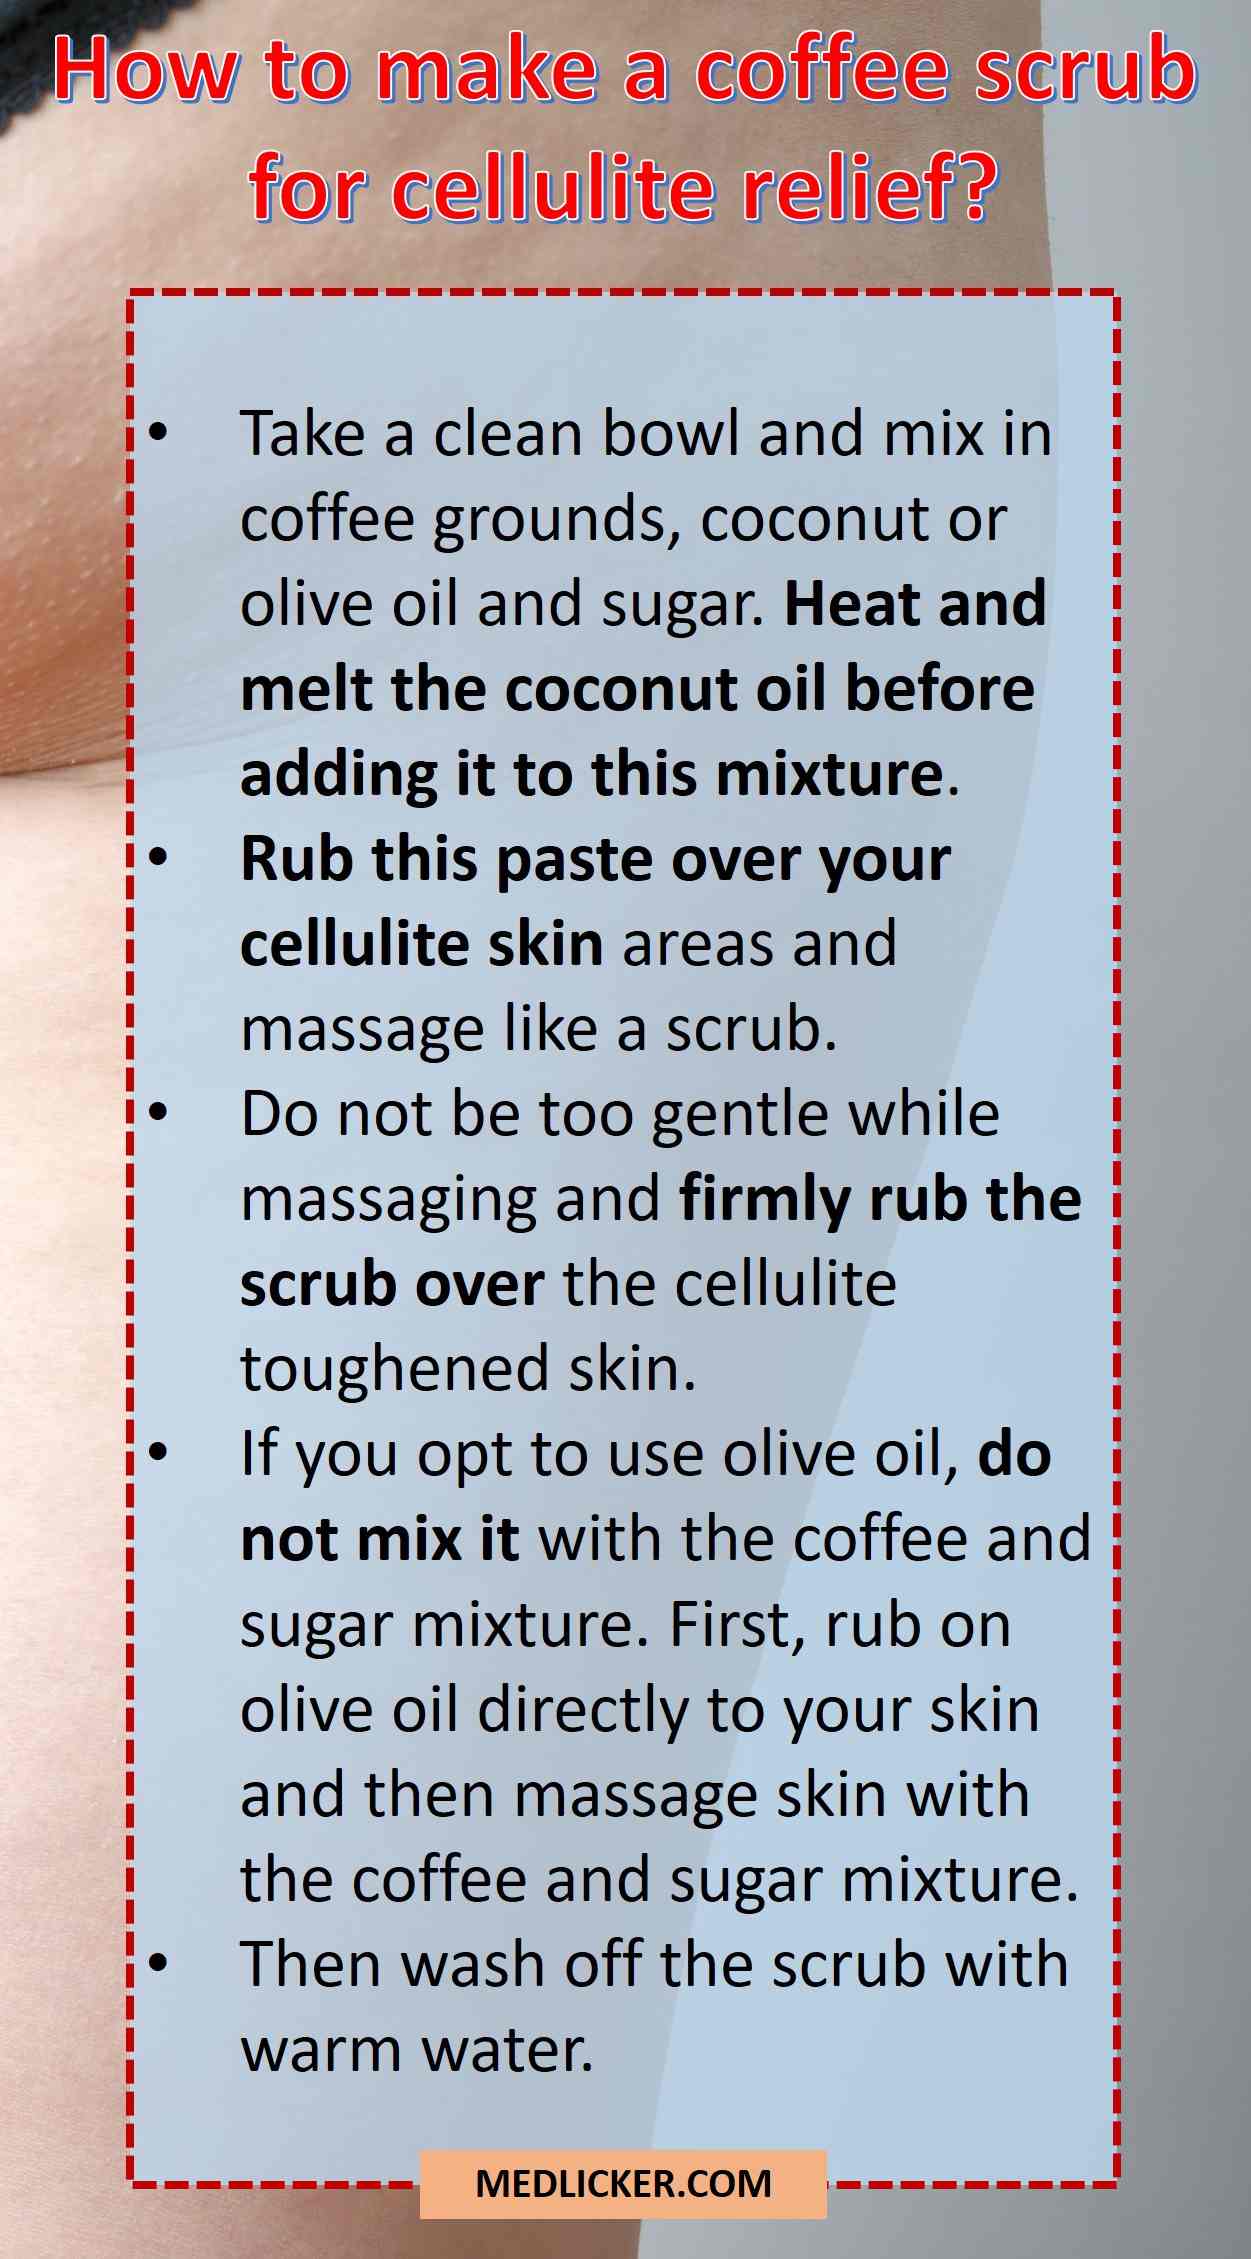 How to make a coffee scrub for cellulite?